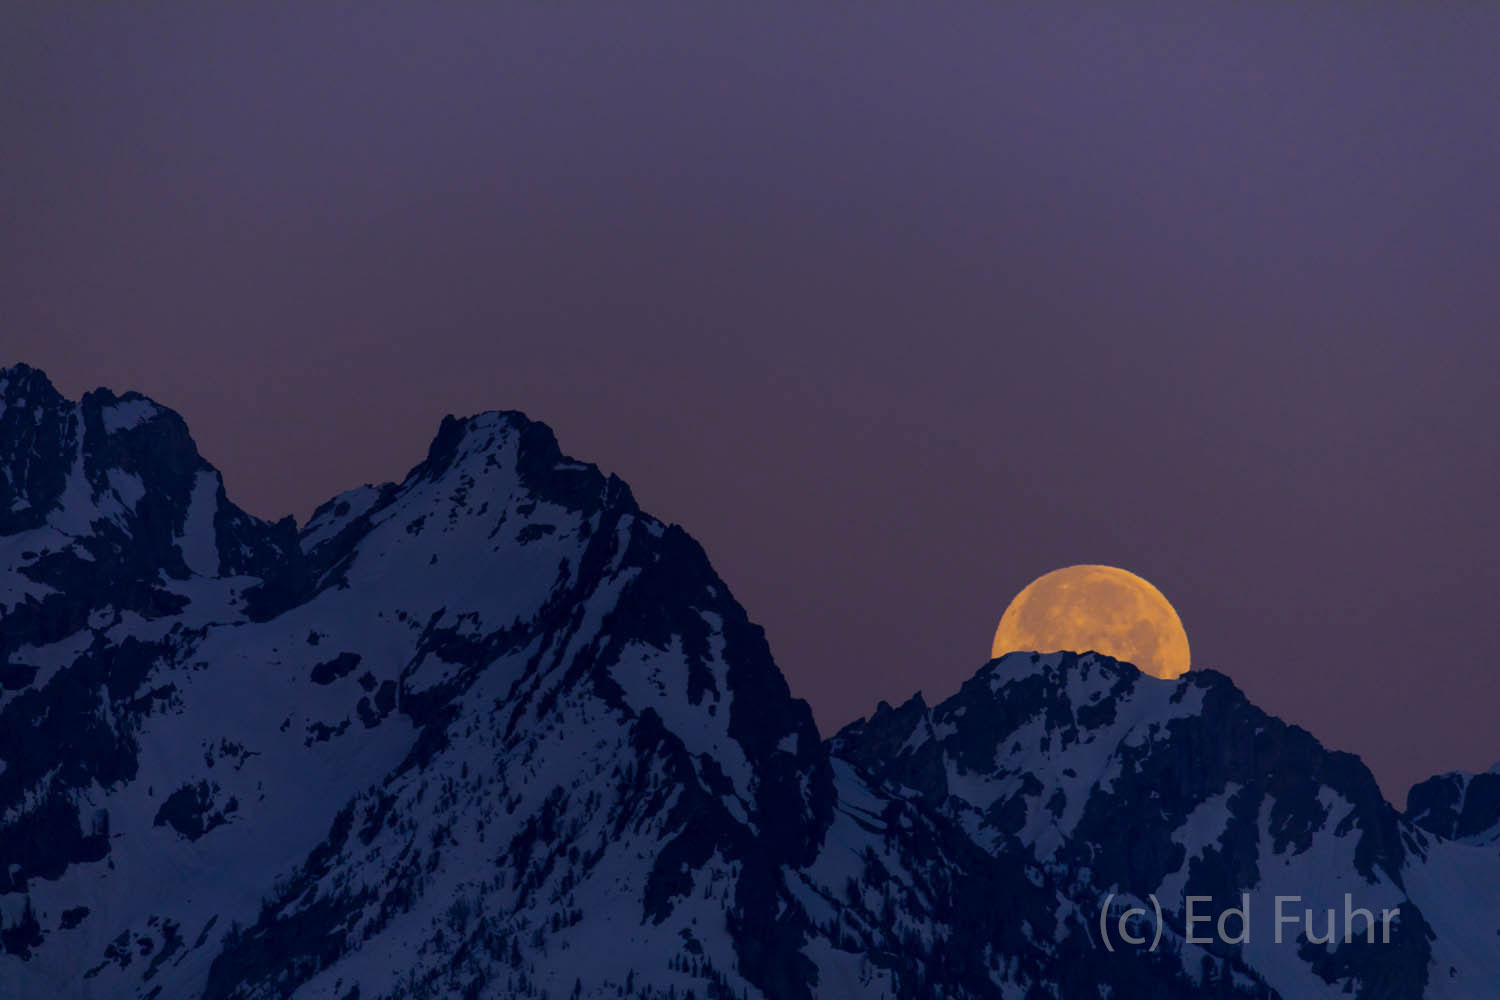 Halfway set over the Teton range, a blue moon fades as the predawn sky begins to light.